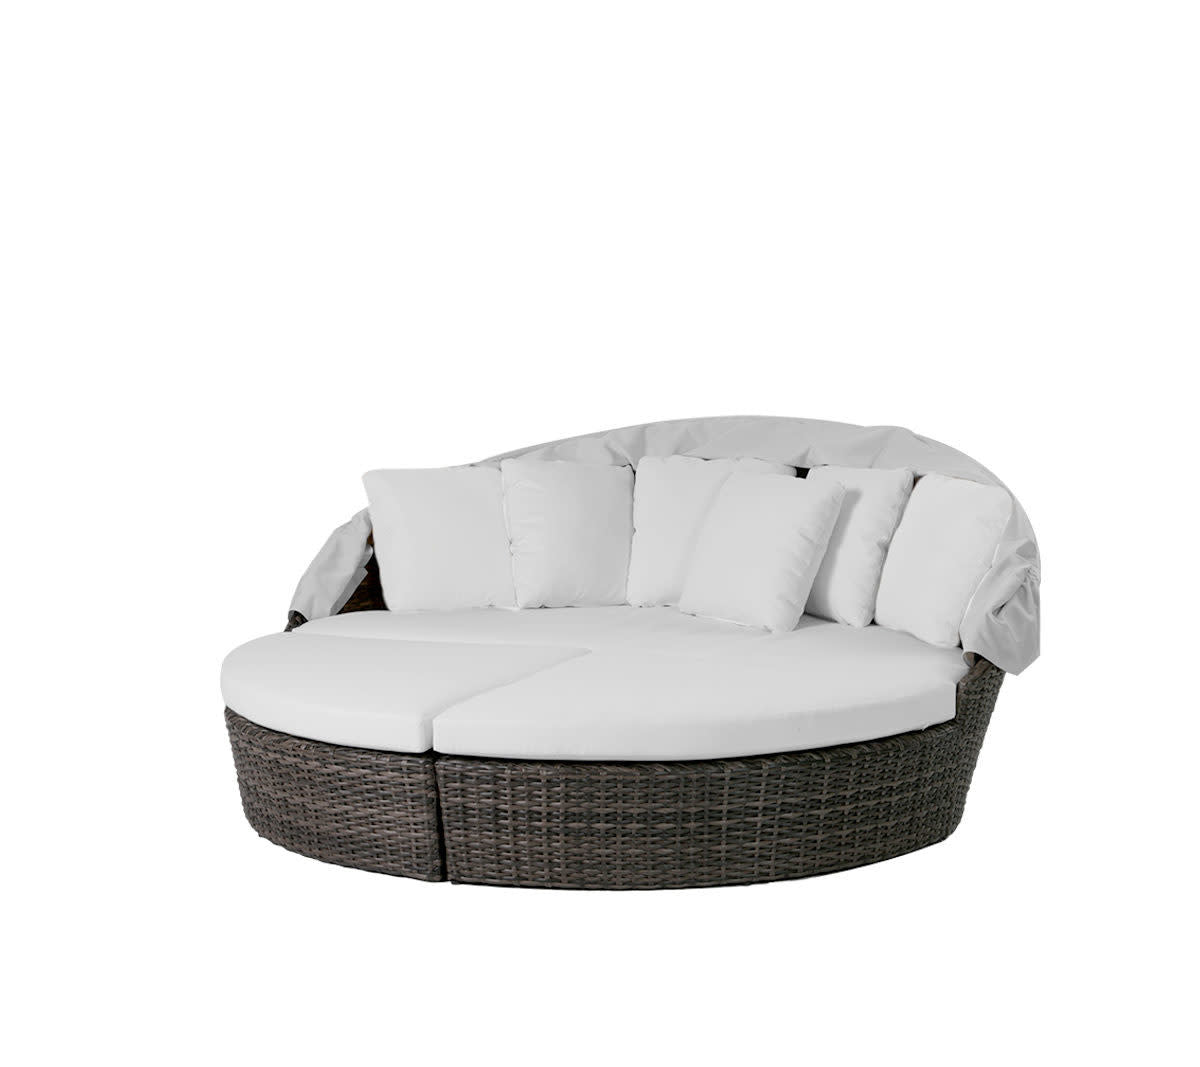 Coral Gables Round Daybed w/Sunbrella Canopy